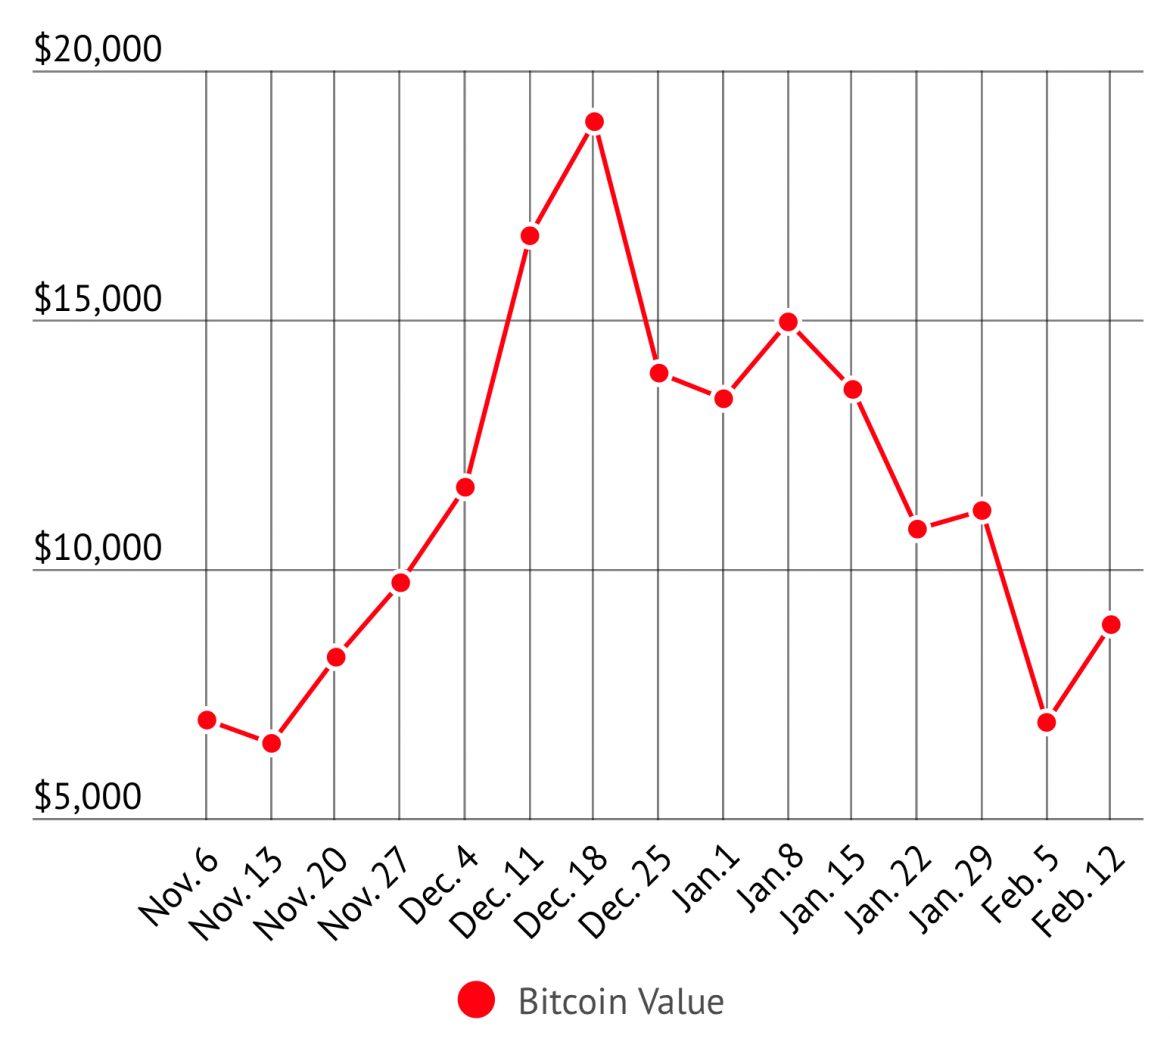 graph showing the value of bitcoin fluctuating from Nov 6 to Feb 12